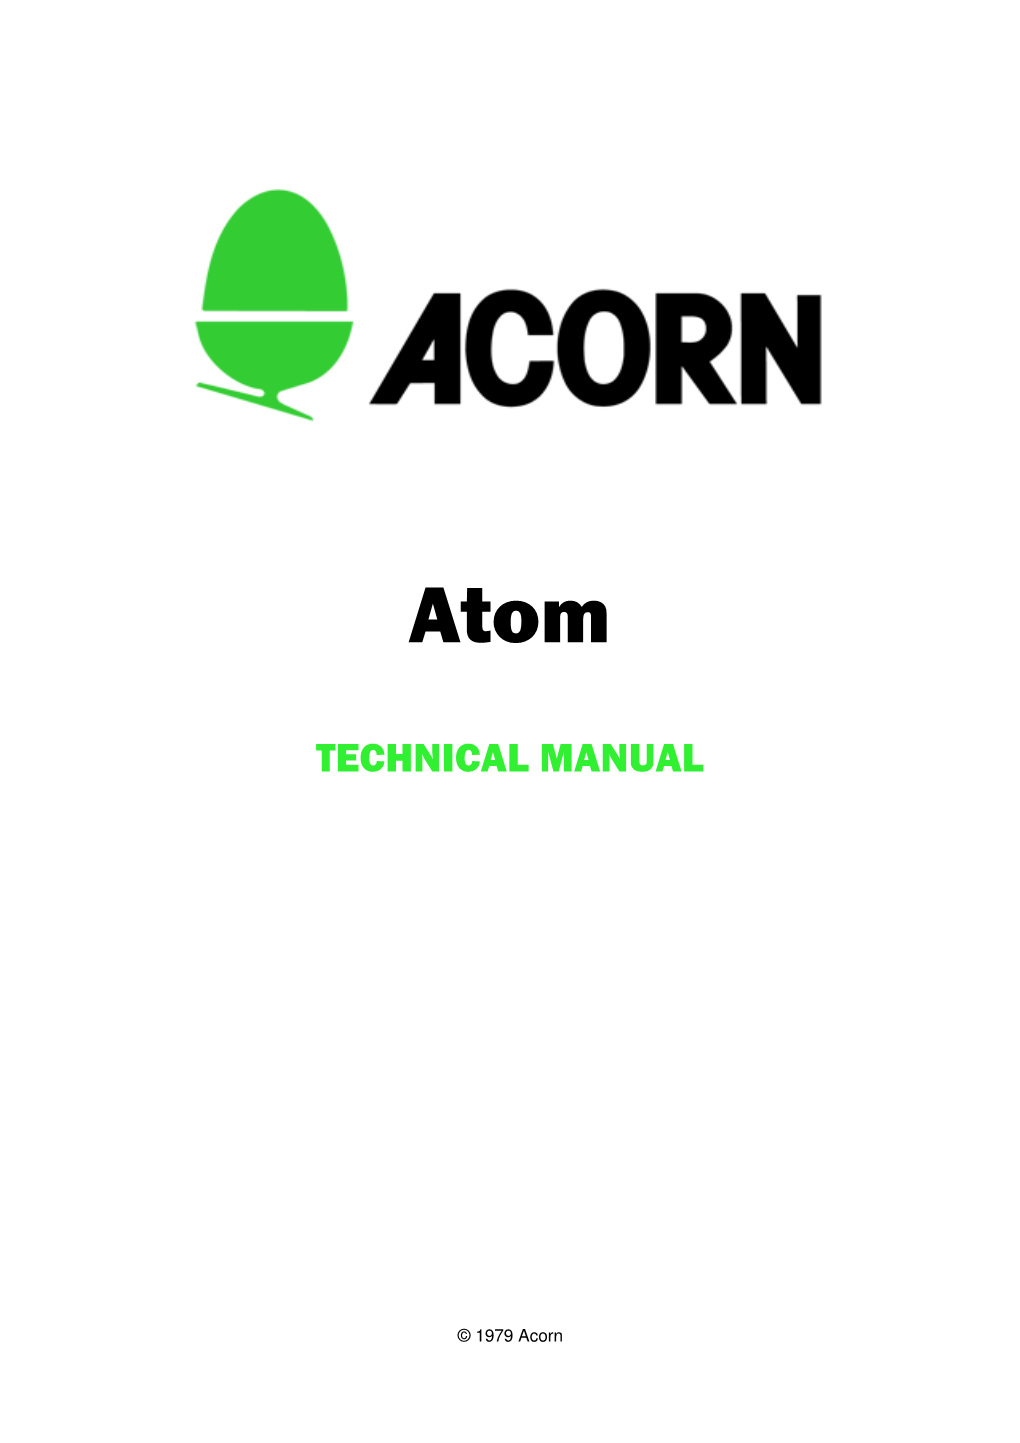 Acorn ATOM Microcomputer Is Available As a Kit of Parts for Assembly by the User, Or As an Assembled and Tested Unit